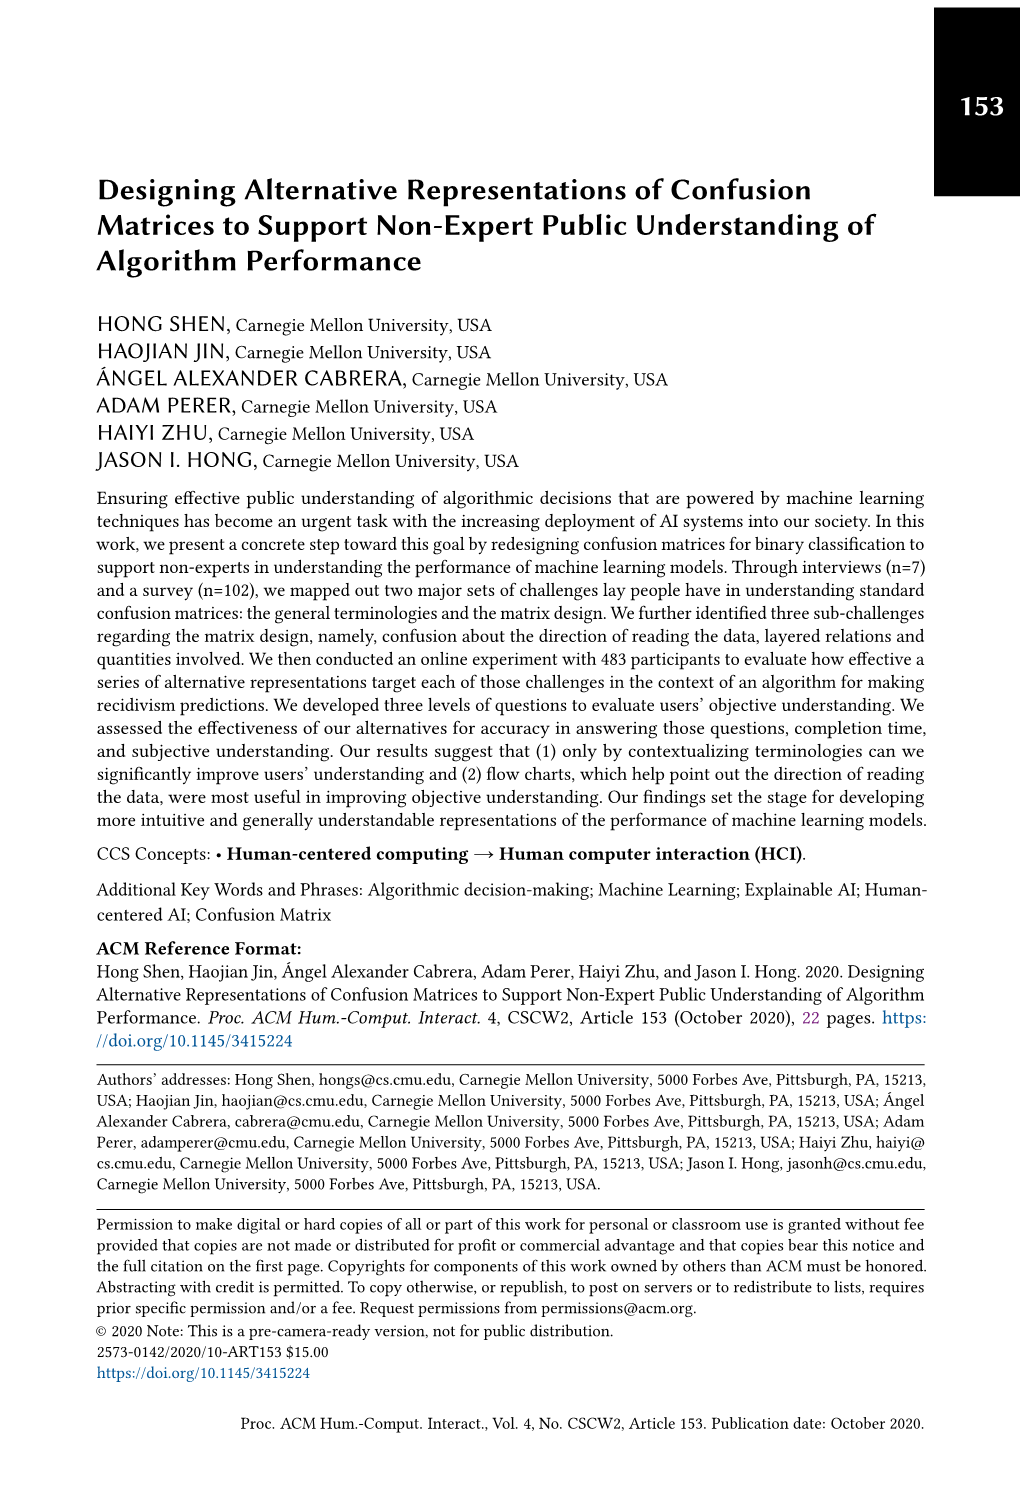 Designing Alternative Representations of Confusion Matrices to Support Non-Expert Public Understanding of Algorithm Performance